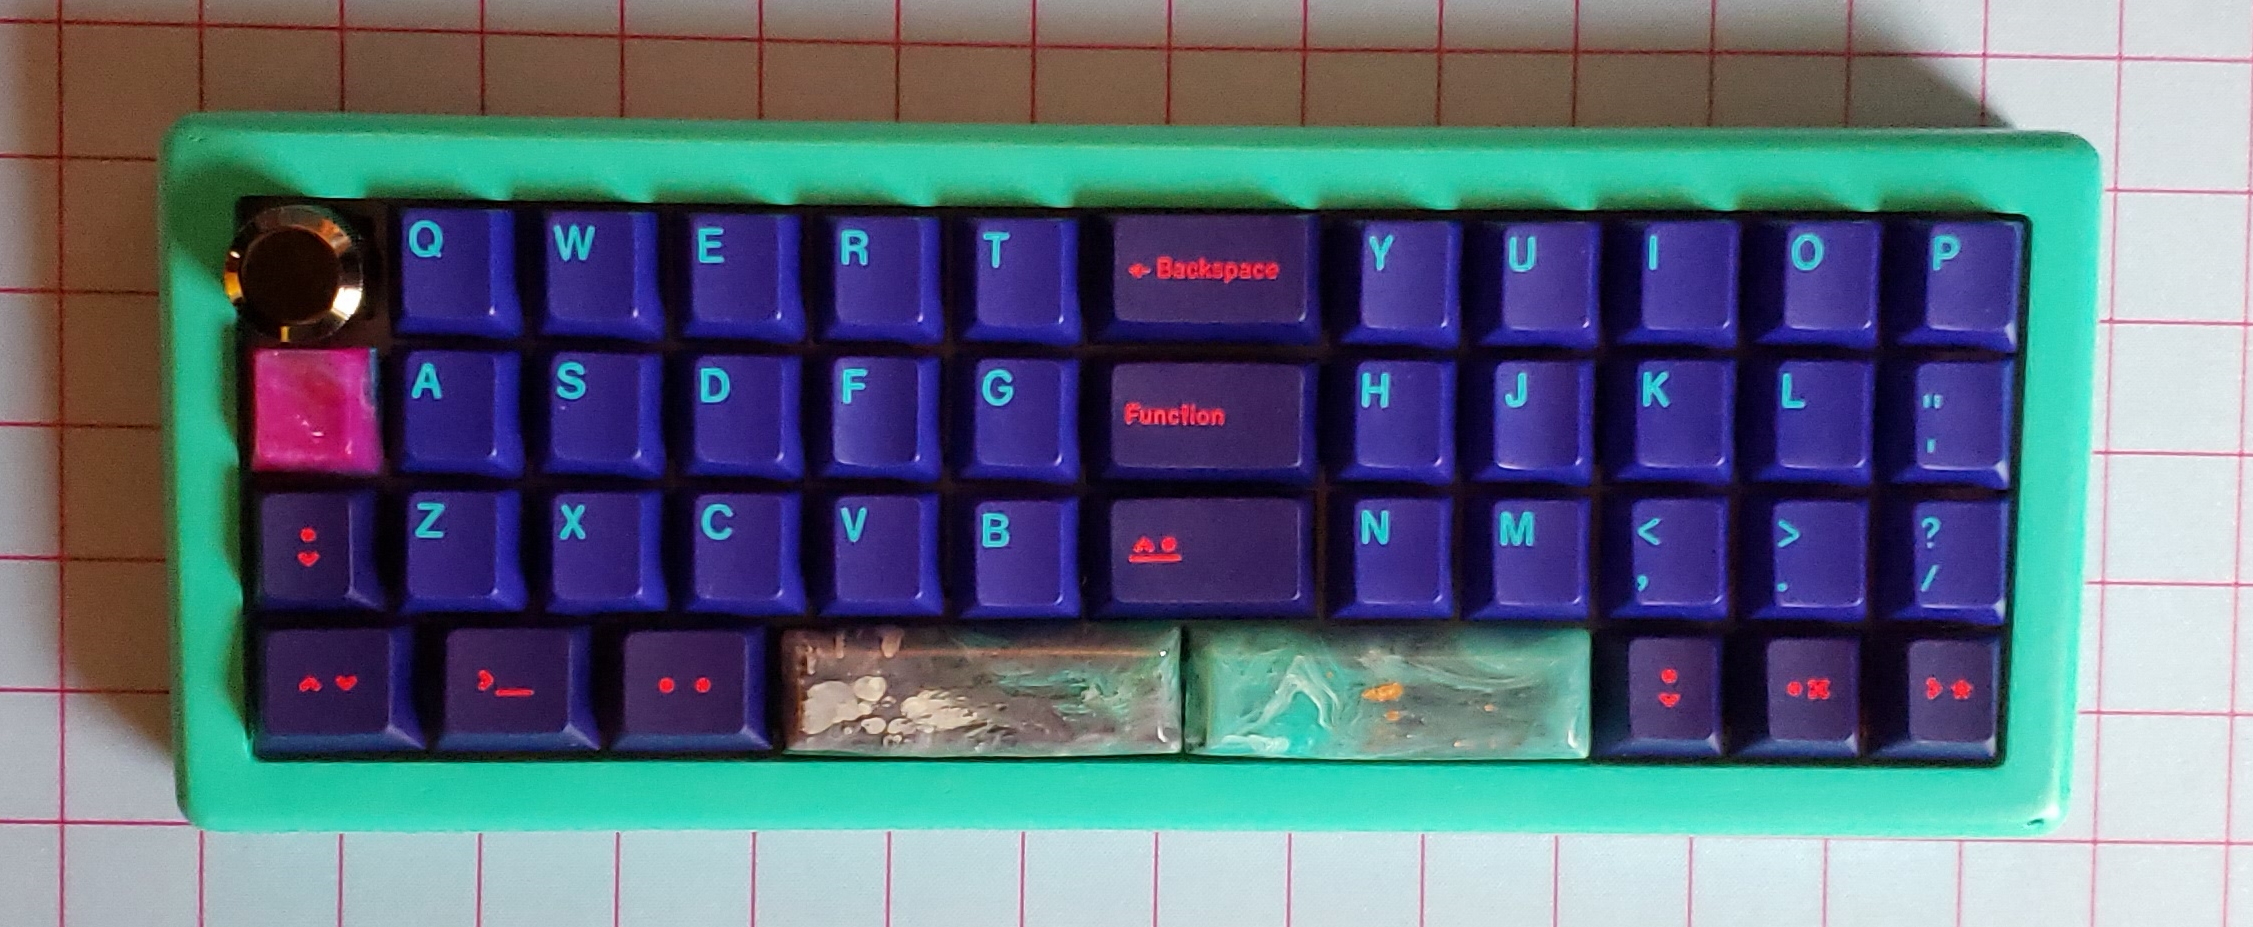 Wanten in a 3D printed case with GMK Laser keycaps, artisan 3u spacebars, and an encoder knob